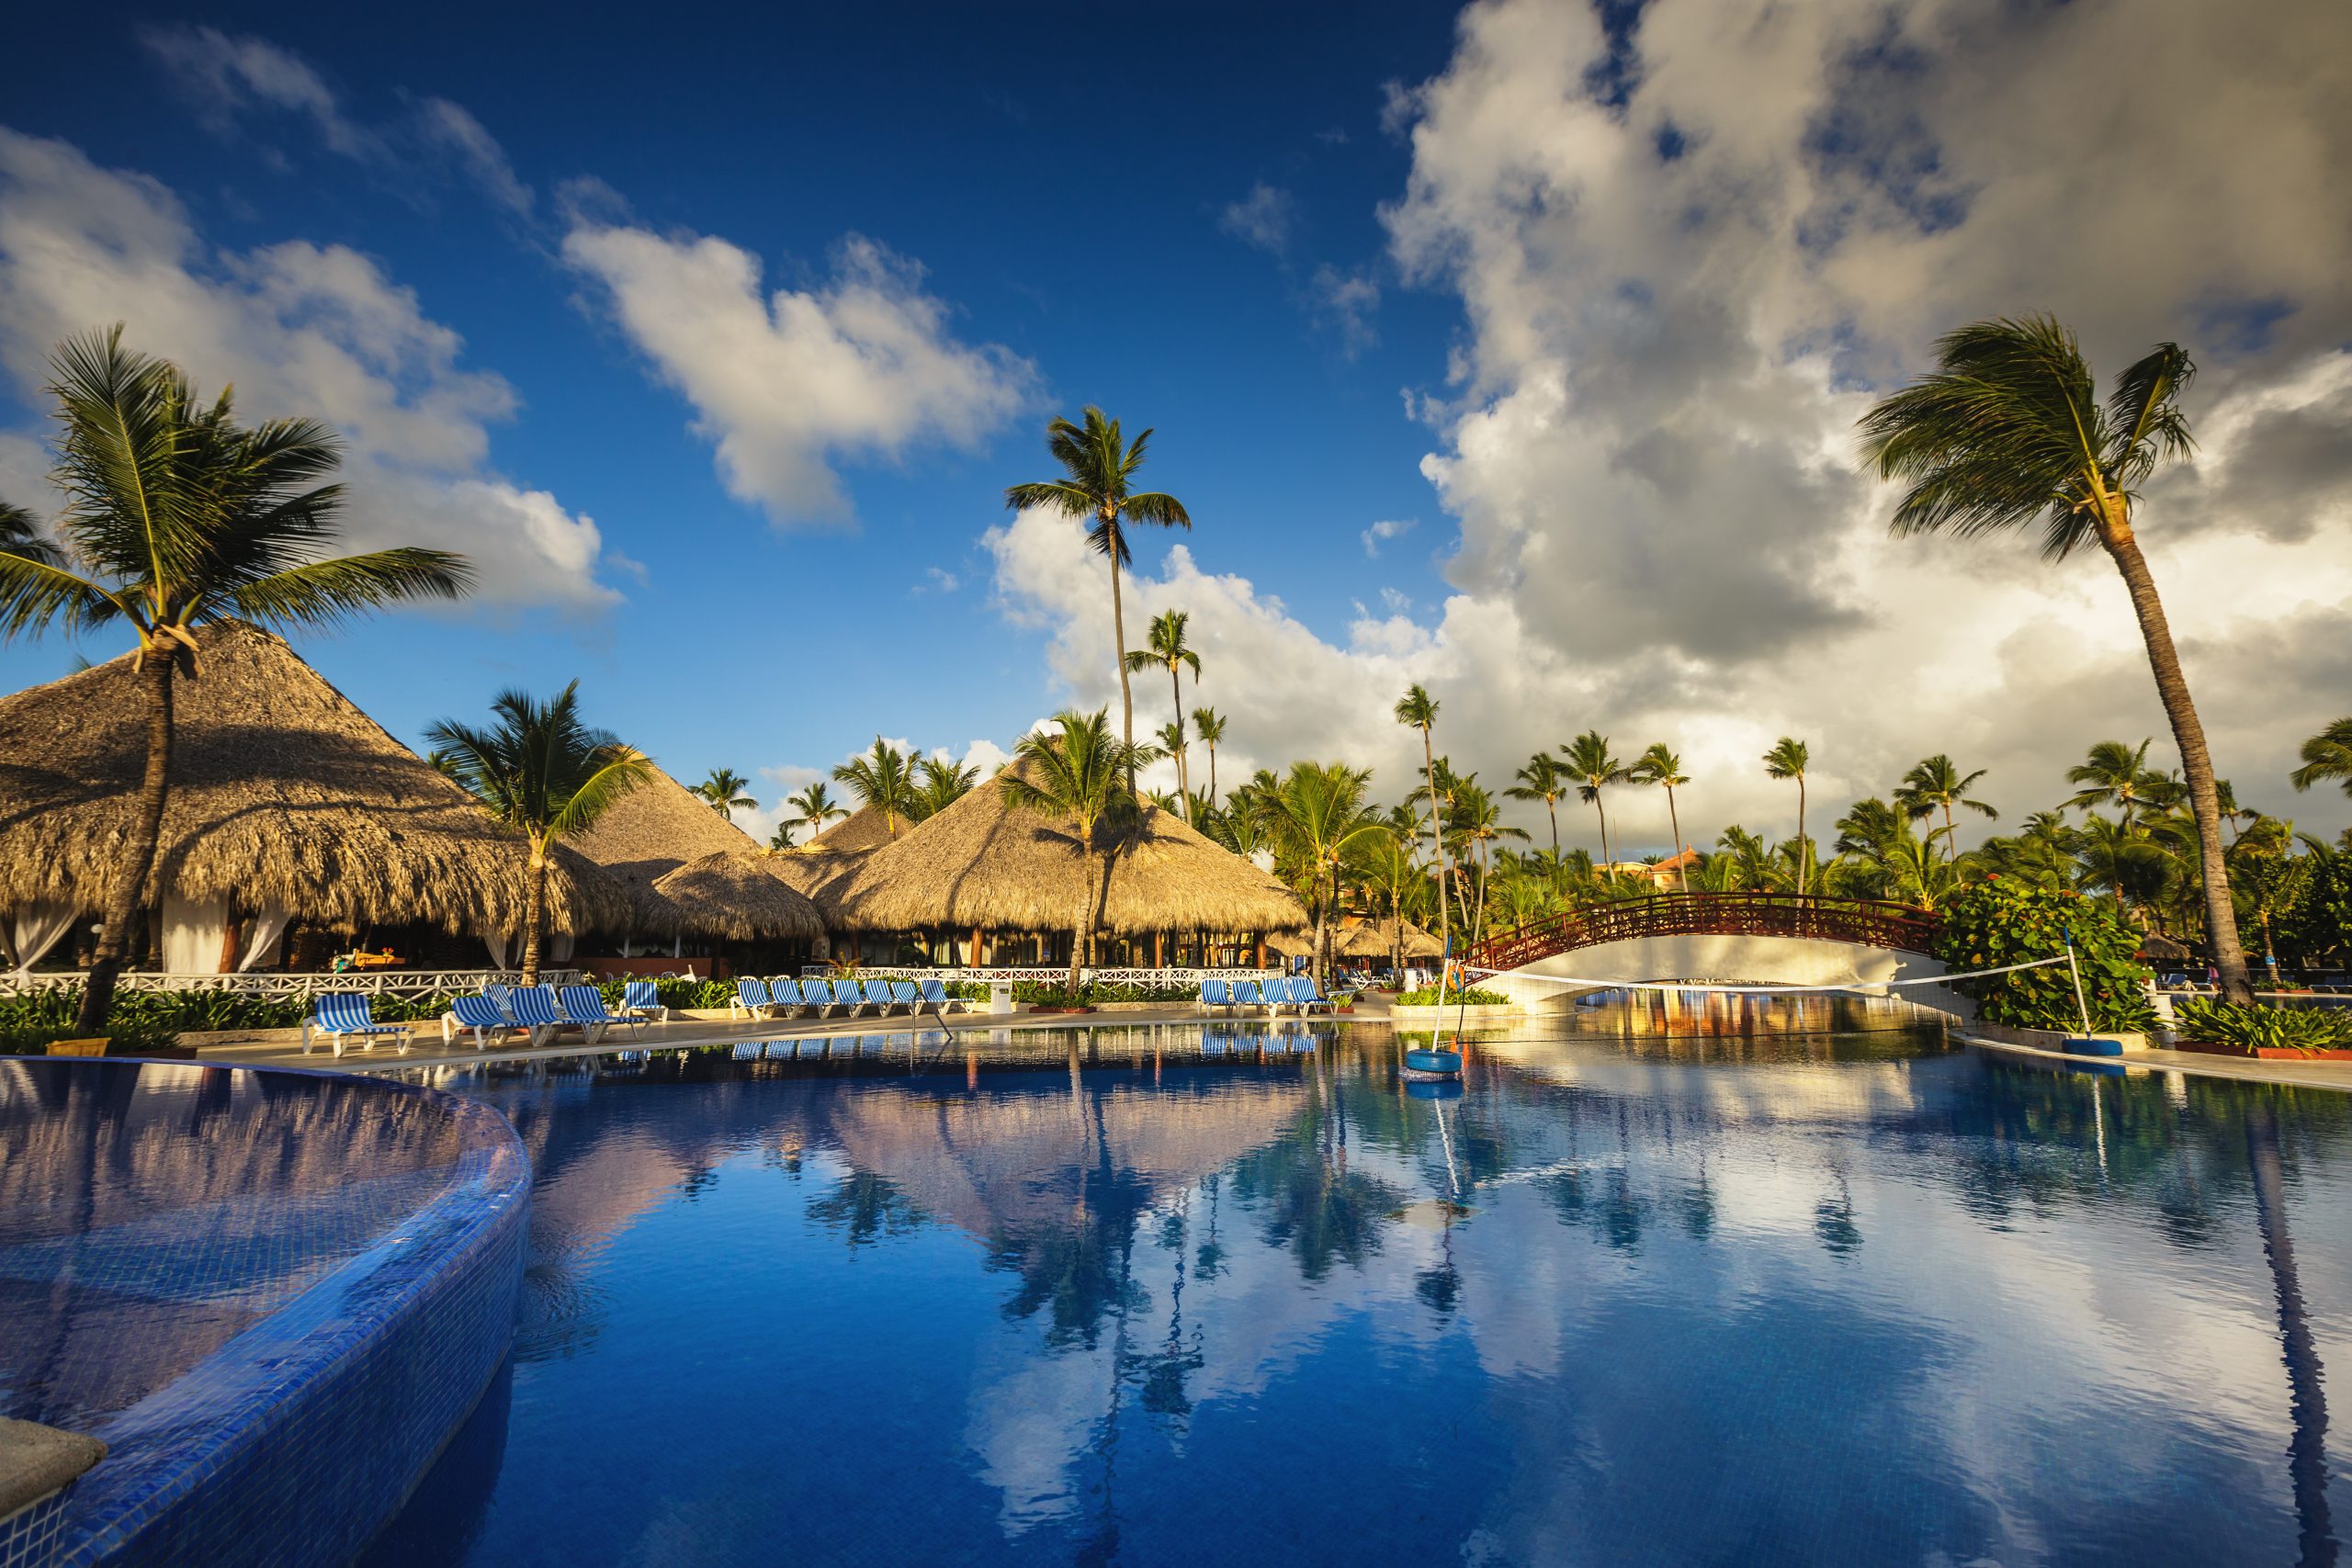 Why is Punta Cana So Popular?